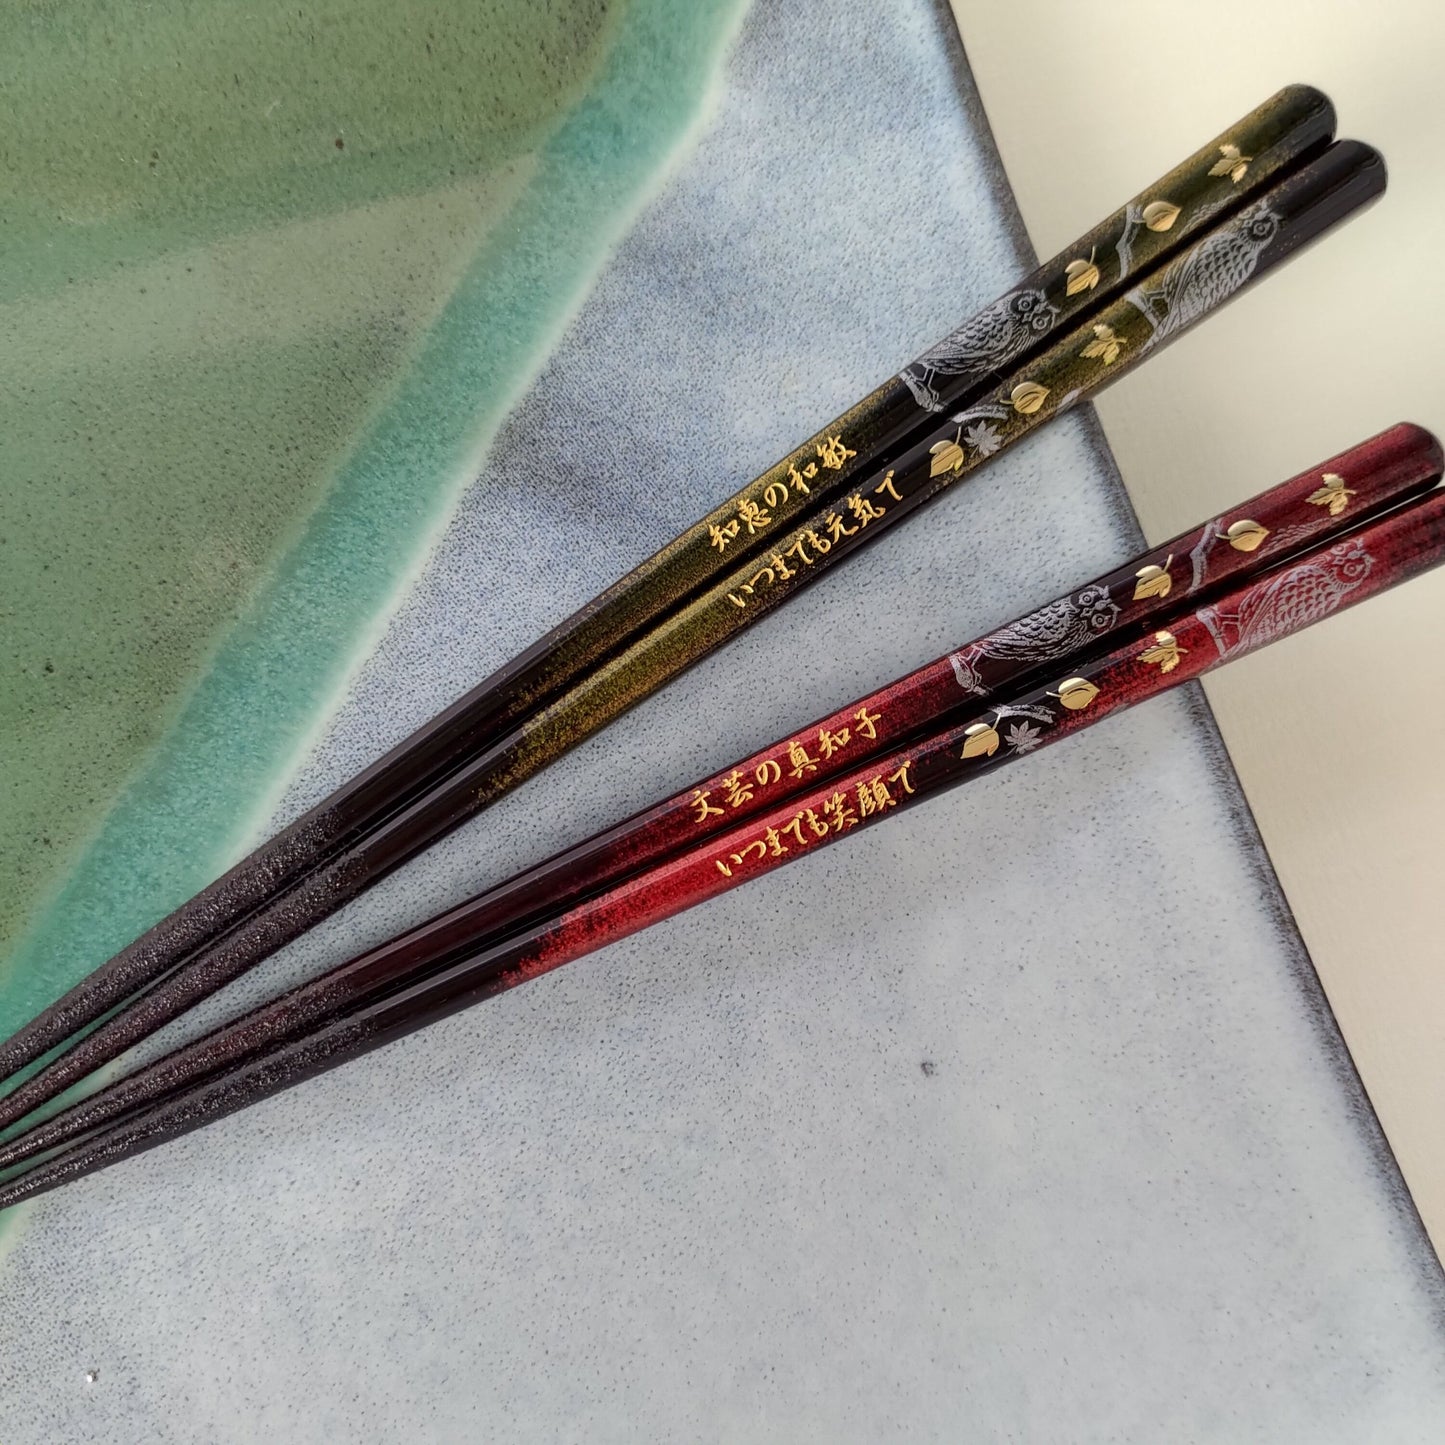 Luxury gold leaves and owls Japanese chopsticks green red - DOUBLE PAIR